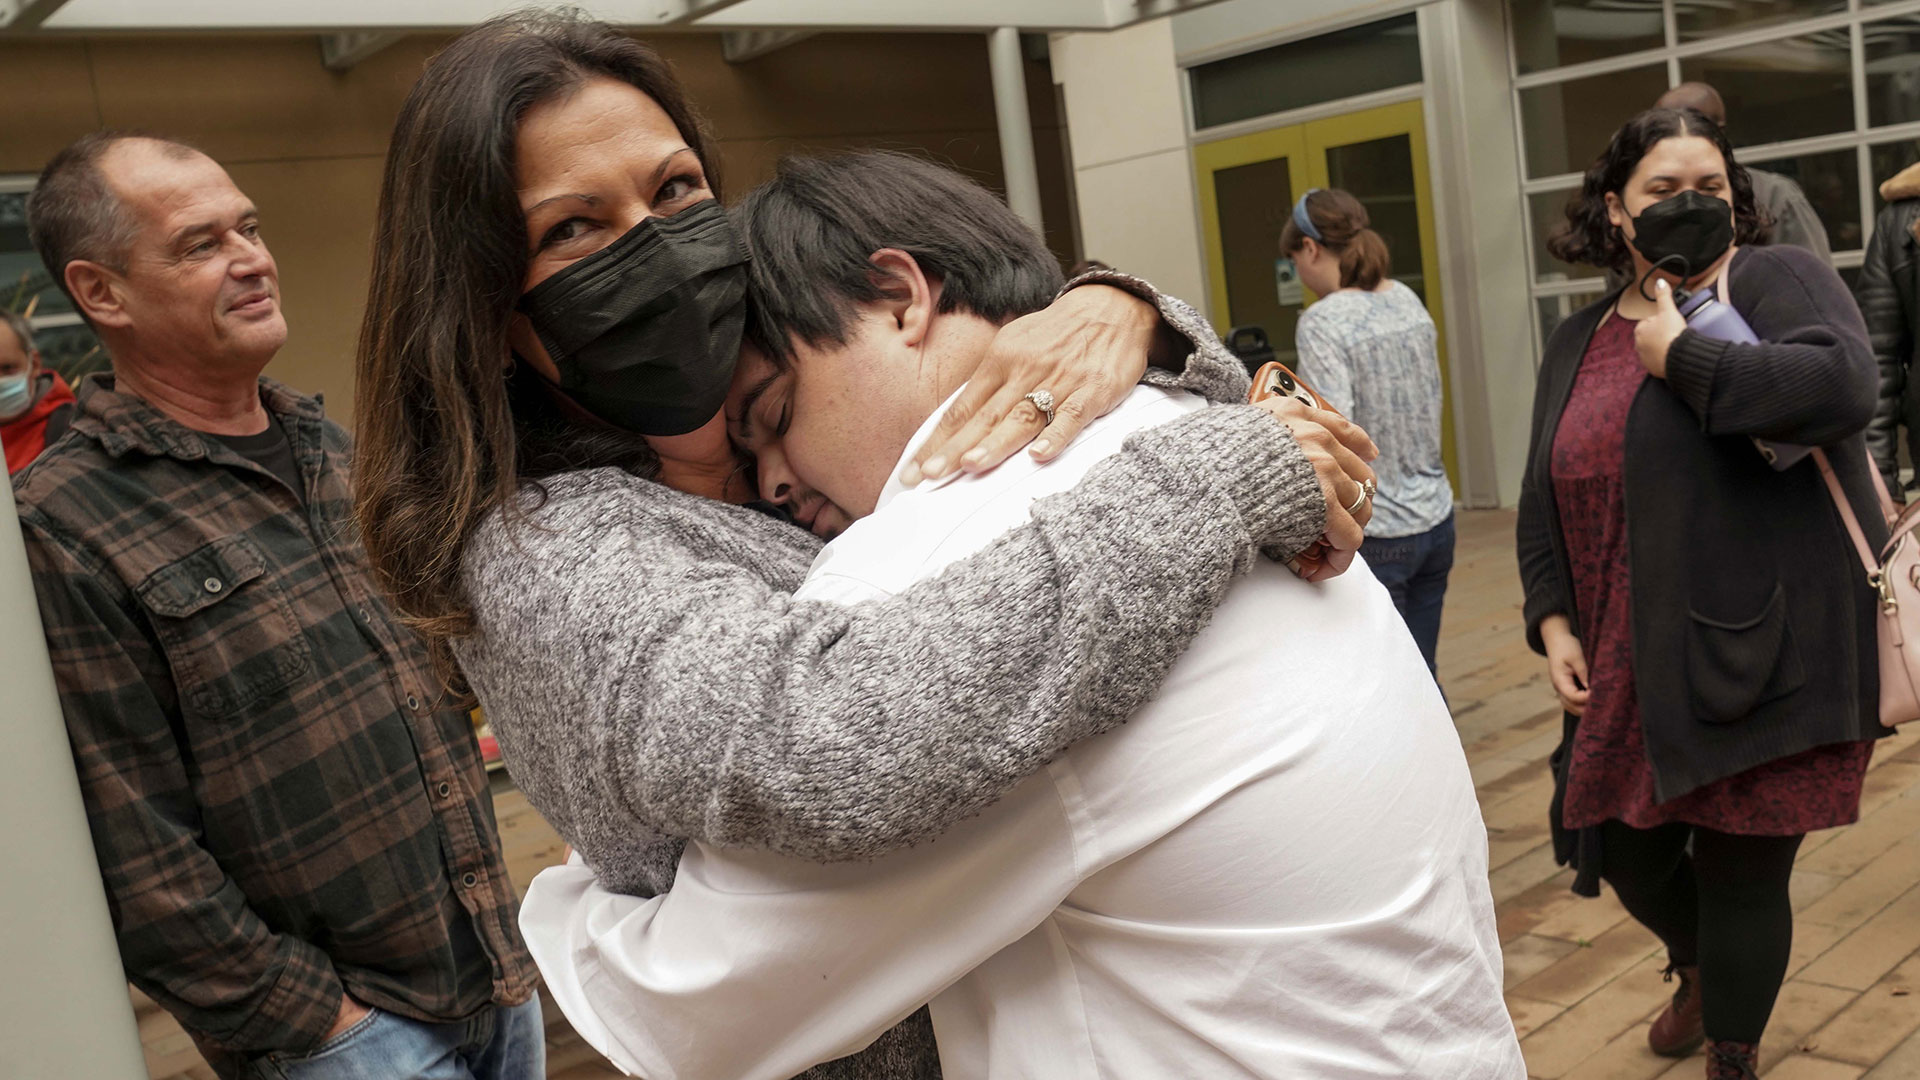 SEED Scholar Ryan Fitch hugs his mom, Melissa, after the student exposition in December